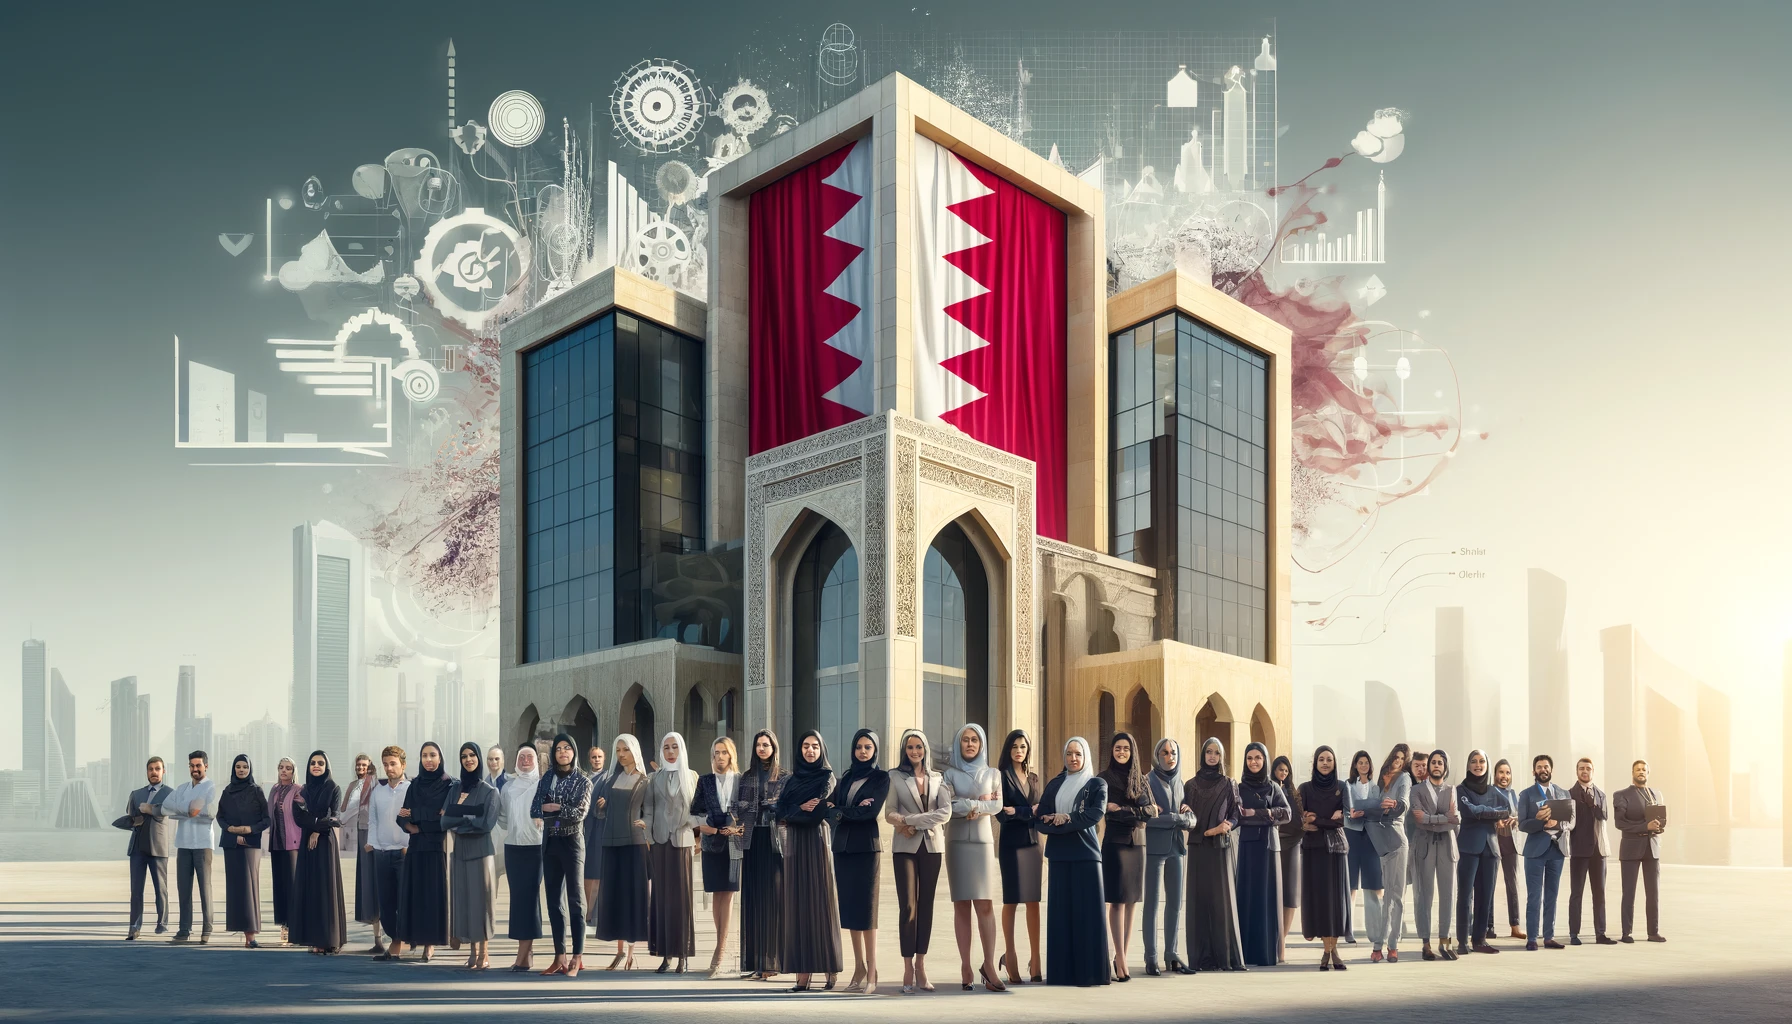 An empowering and non-controversial image representing women entrepreneurs in family businesses in Bahrain. The image features a modern office buildi